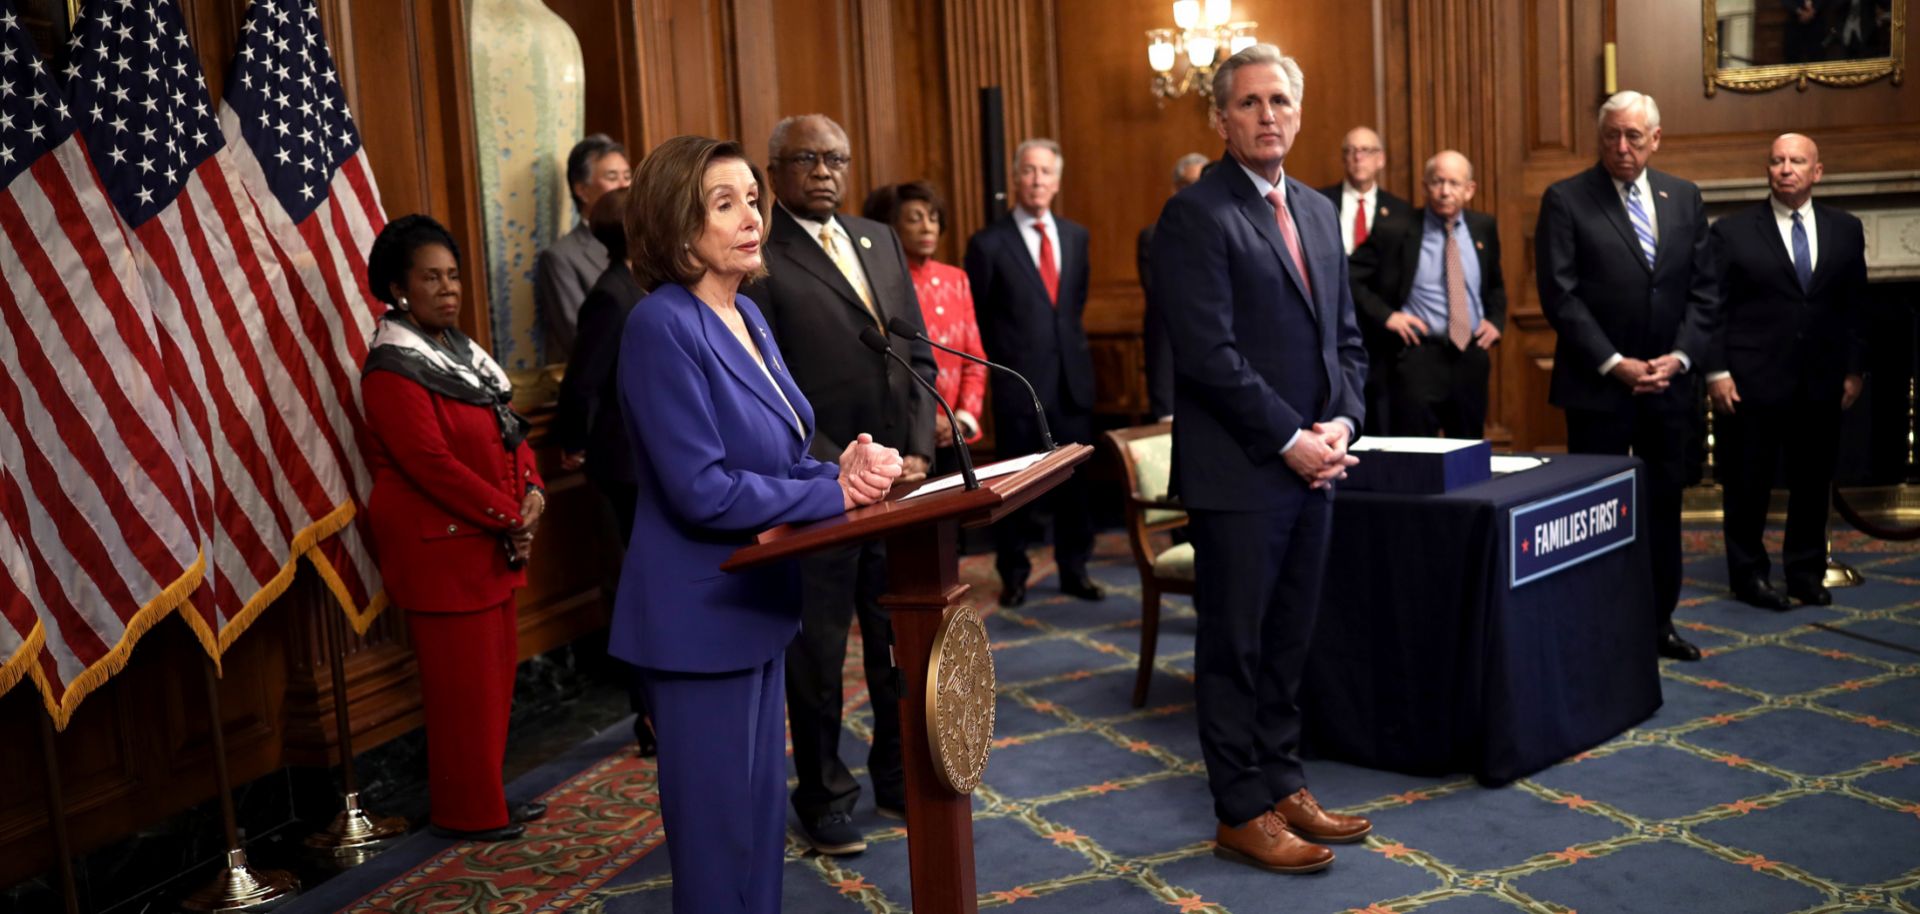 Speaker of the House Nancy Pelosi discusses the stimulus bill known as the CARES Act after the bill was passed at the U.S. Capitol on March 27, 2020.